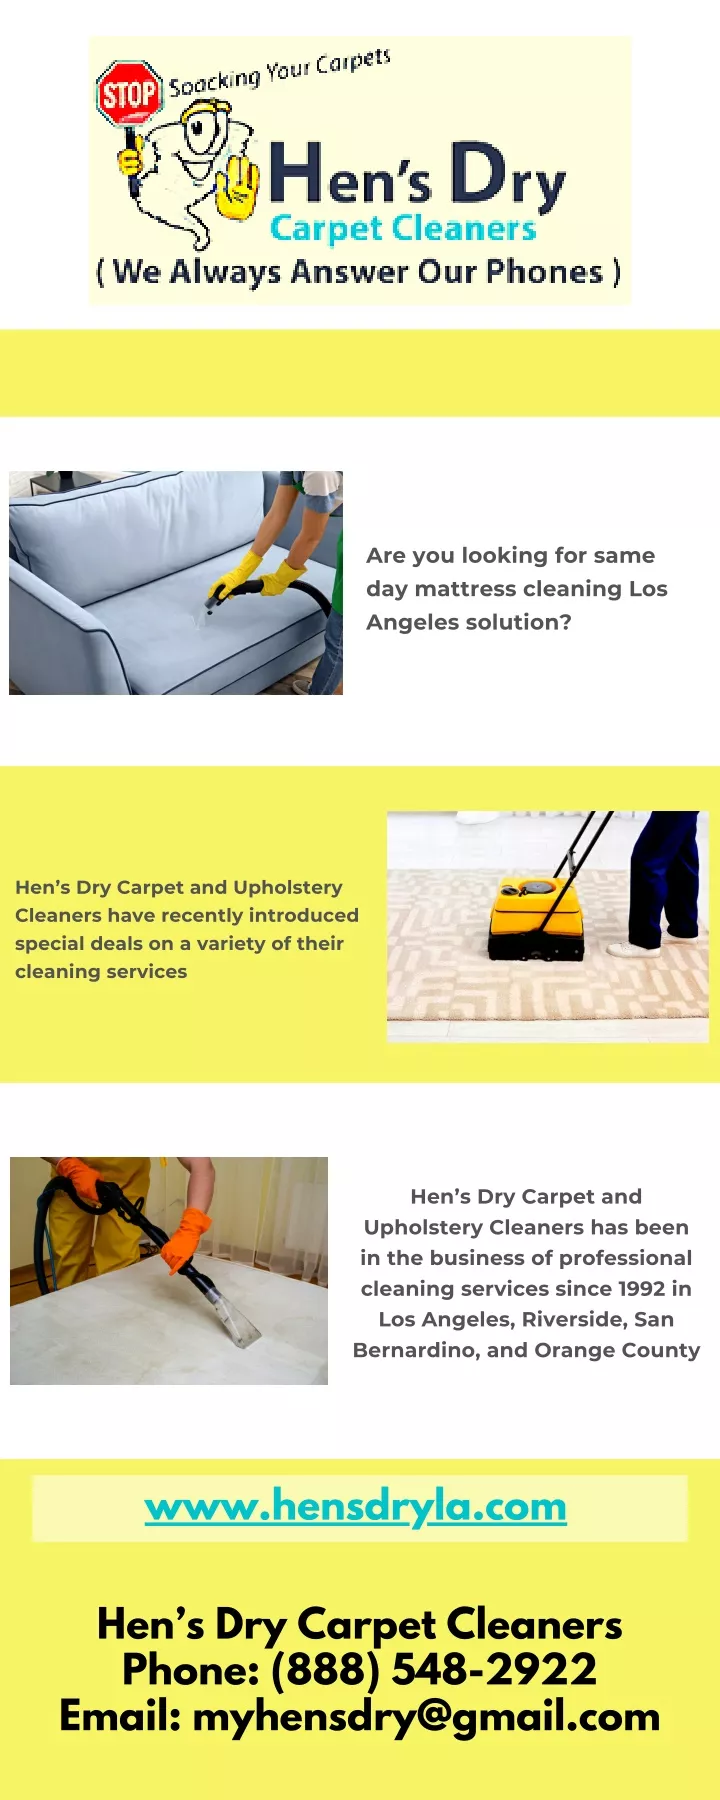 are you looking for same day mattress cleaning